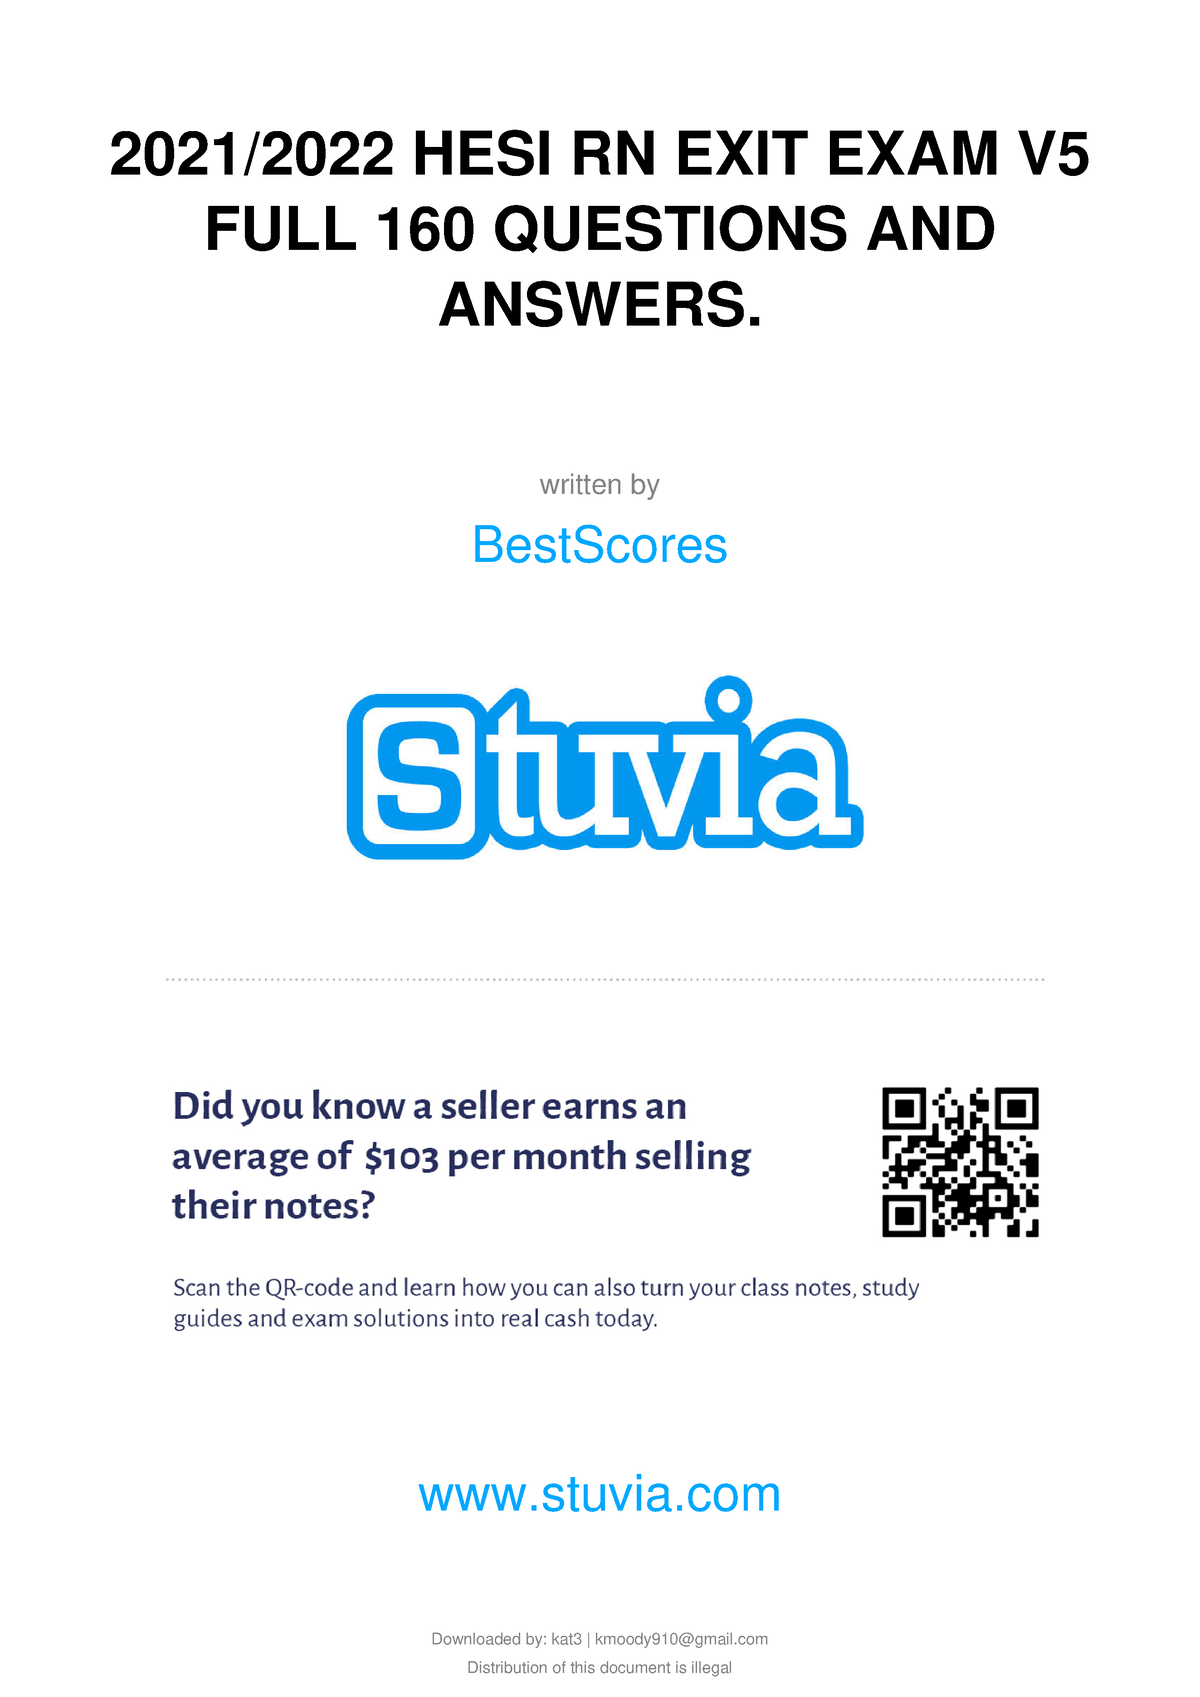 Stuvia 1535996 20212022 hesi rn exit exam v5 full 160 questions and